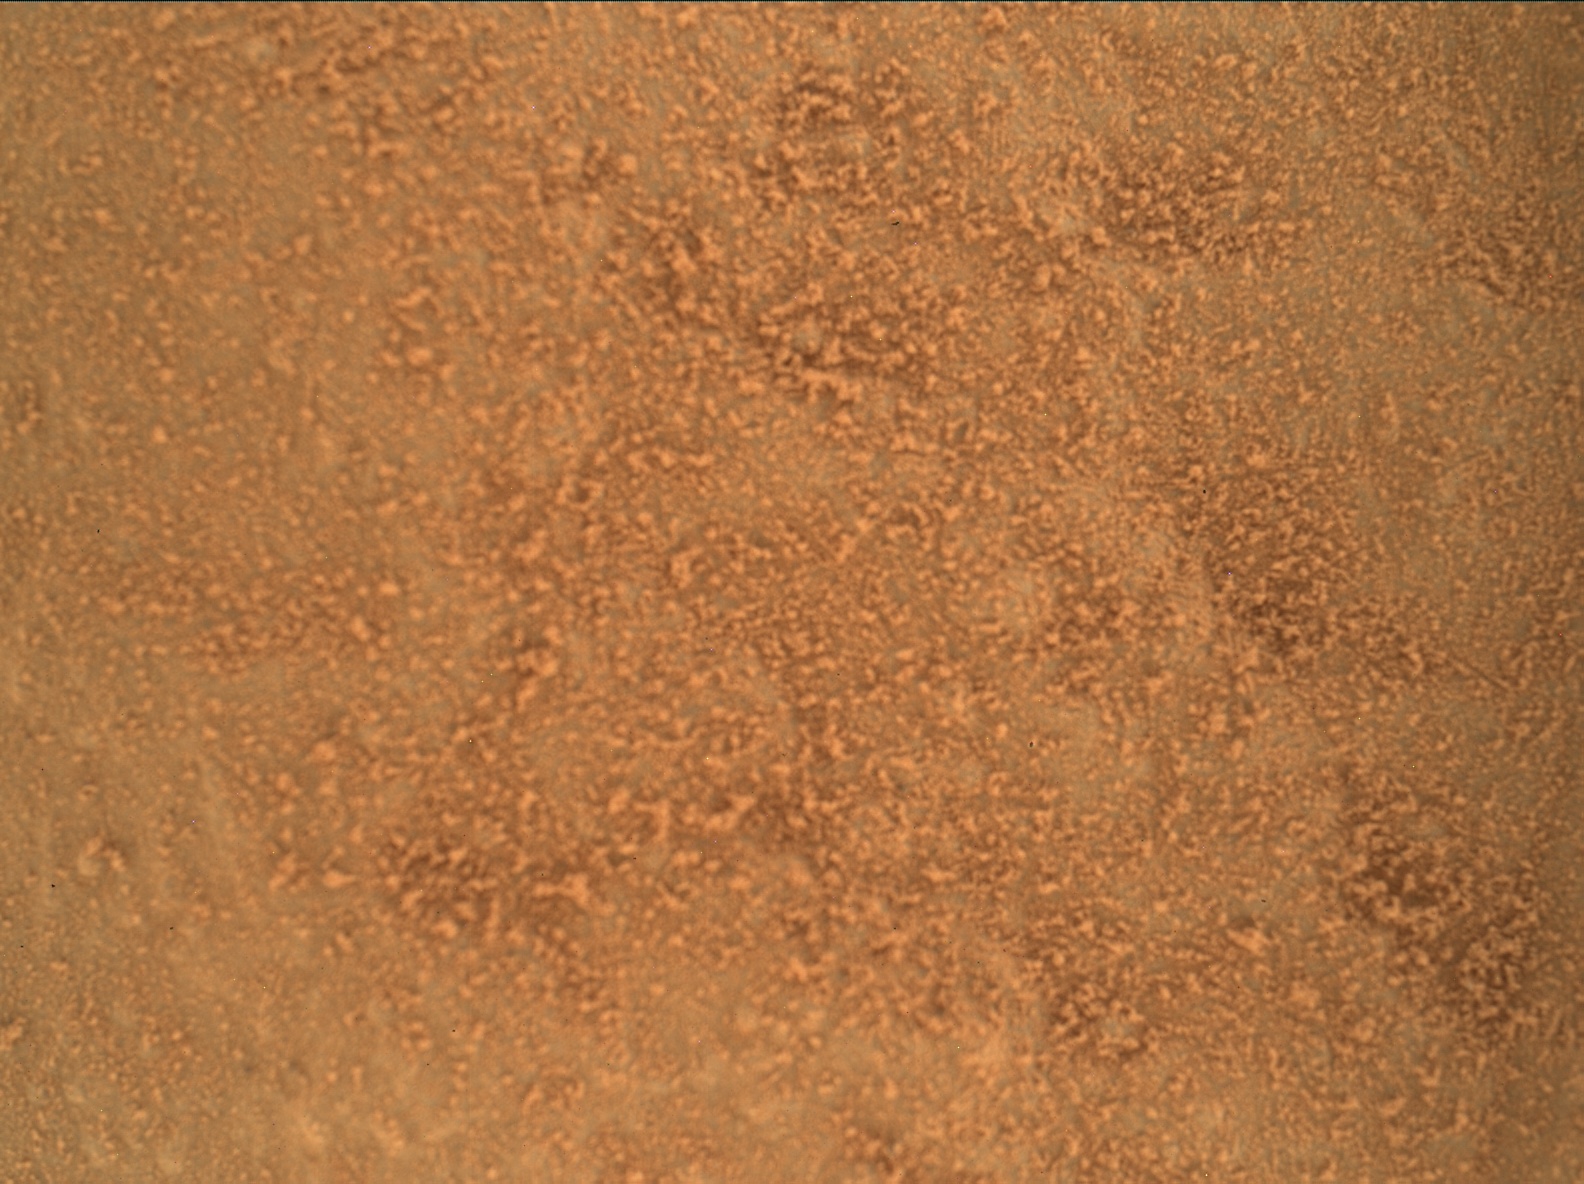 Nasa's Mars rover Curiosity acquired this image using its Mars Hand Lens Imager (MAHLI) on Sol 129